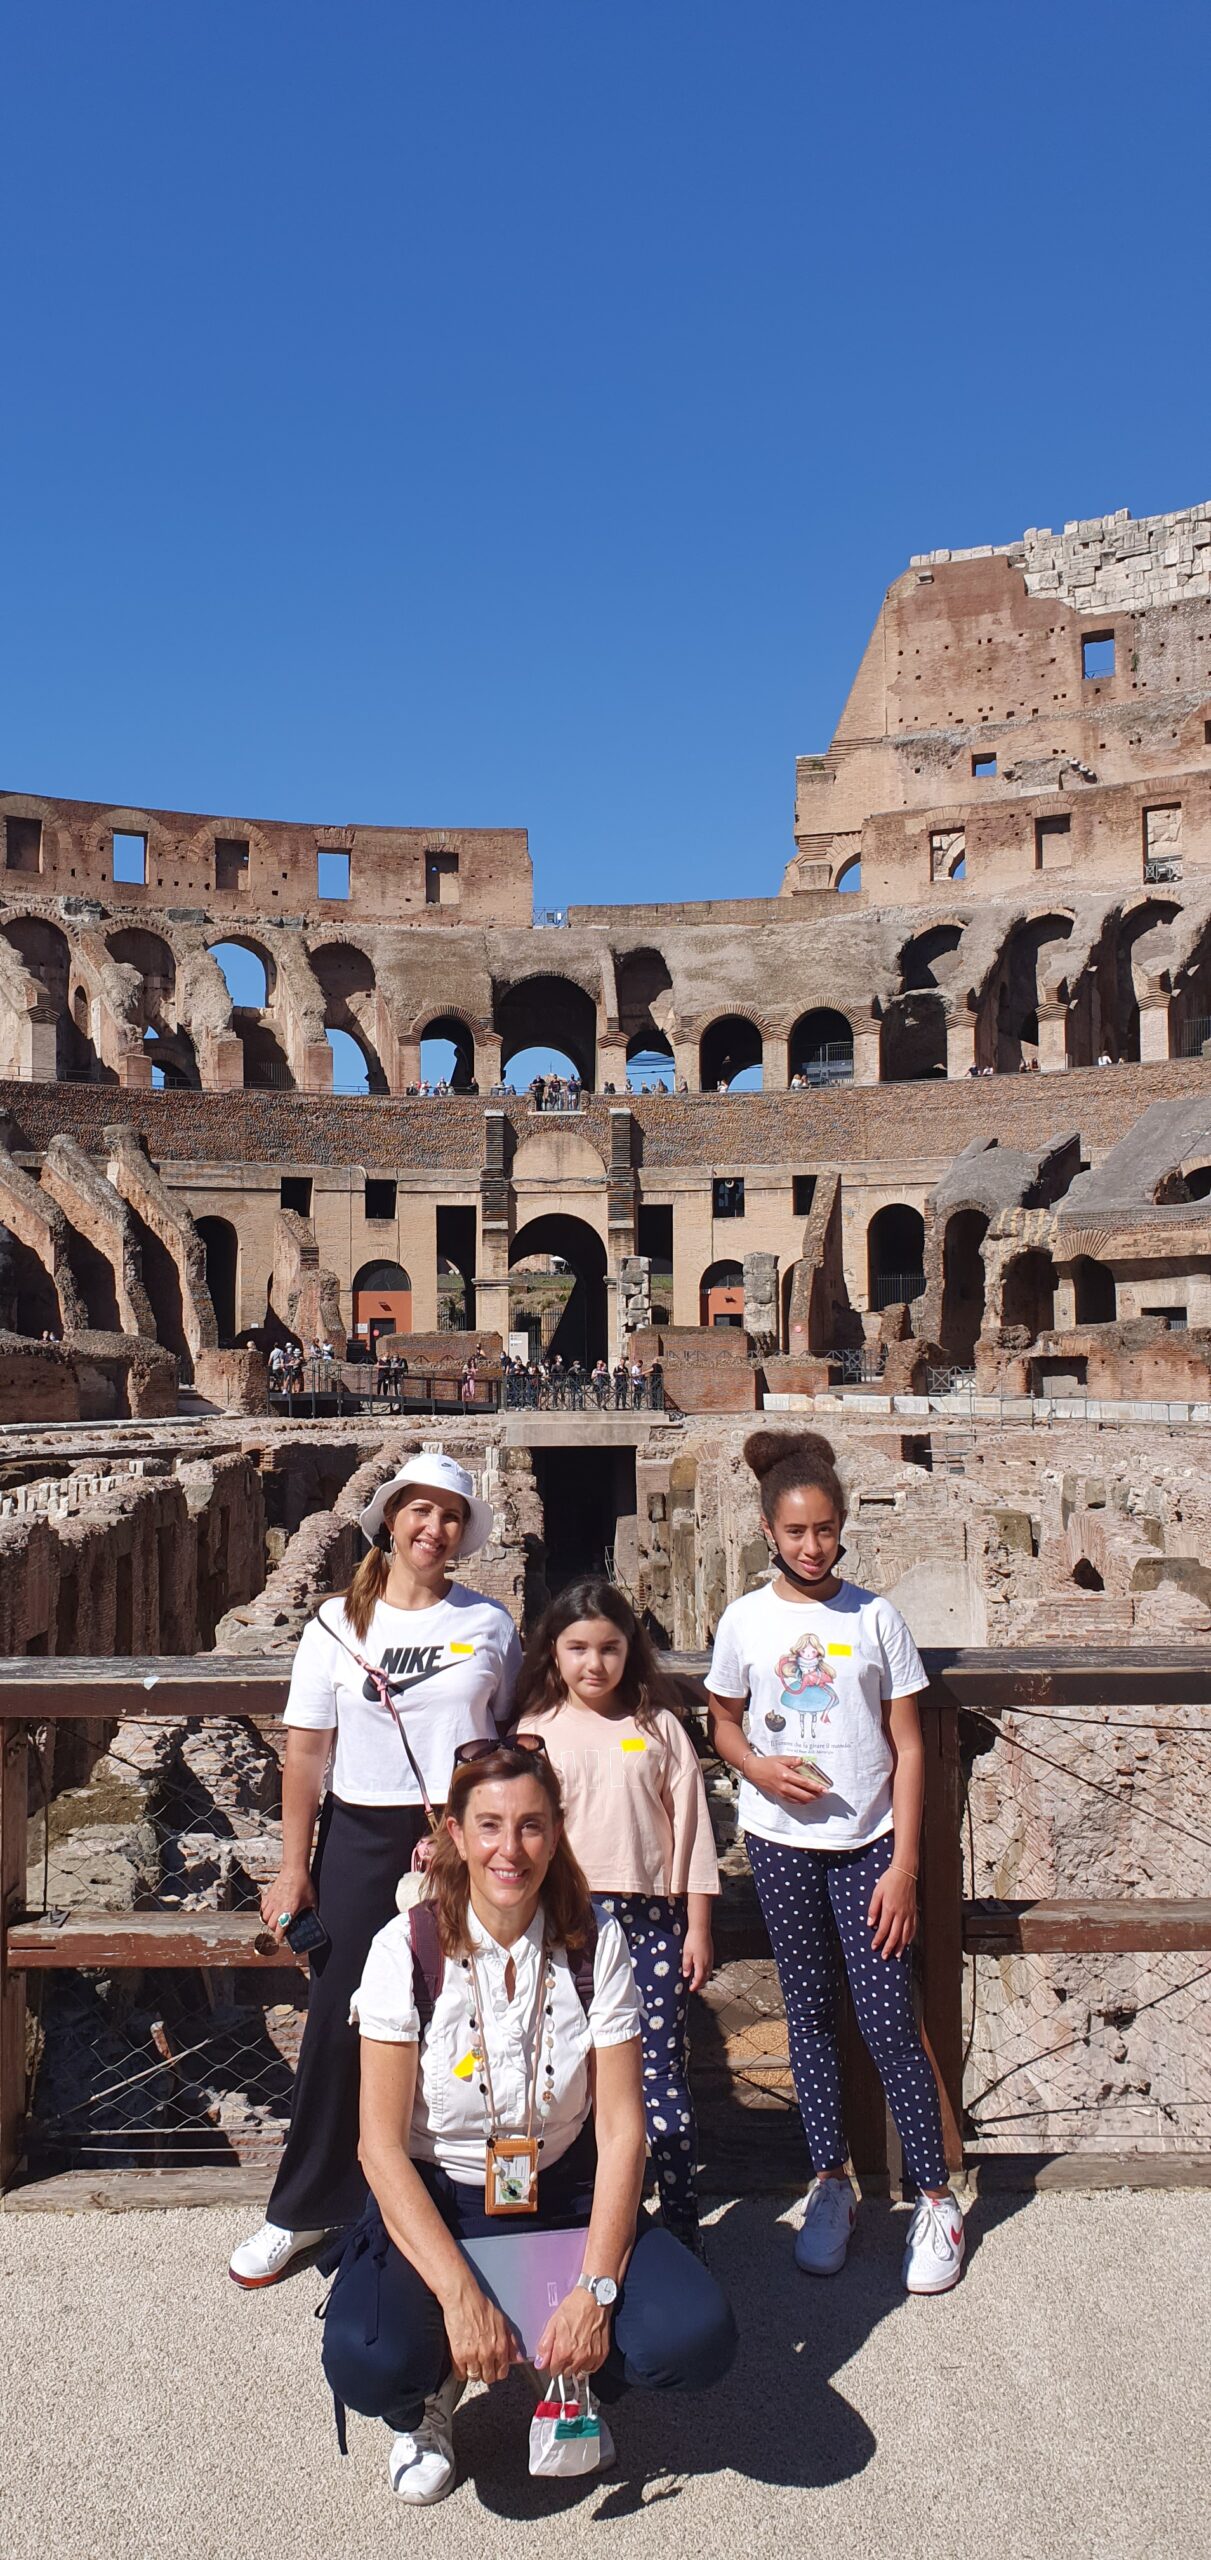 The Colosseum, Suset and the two girls